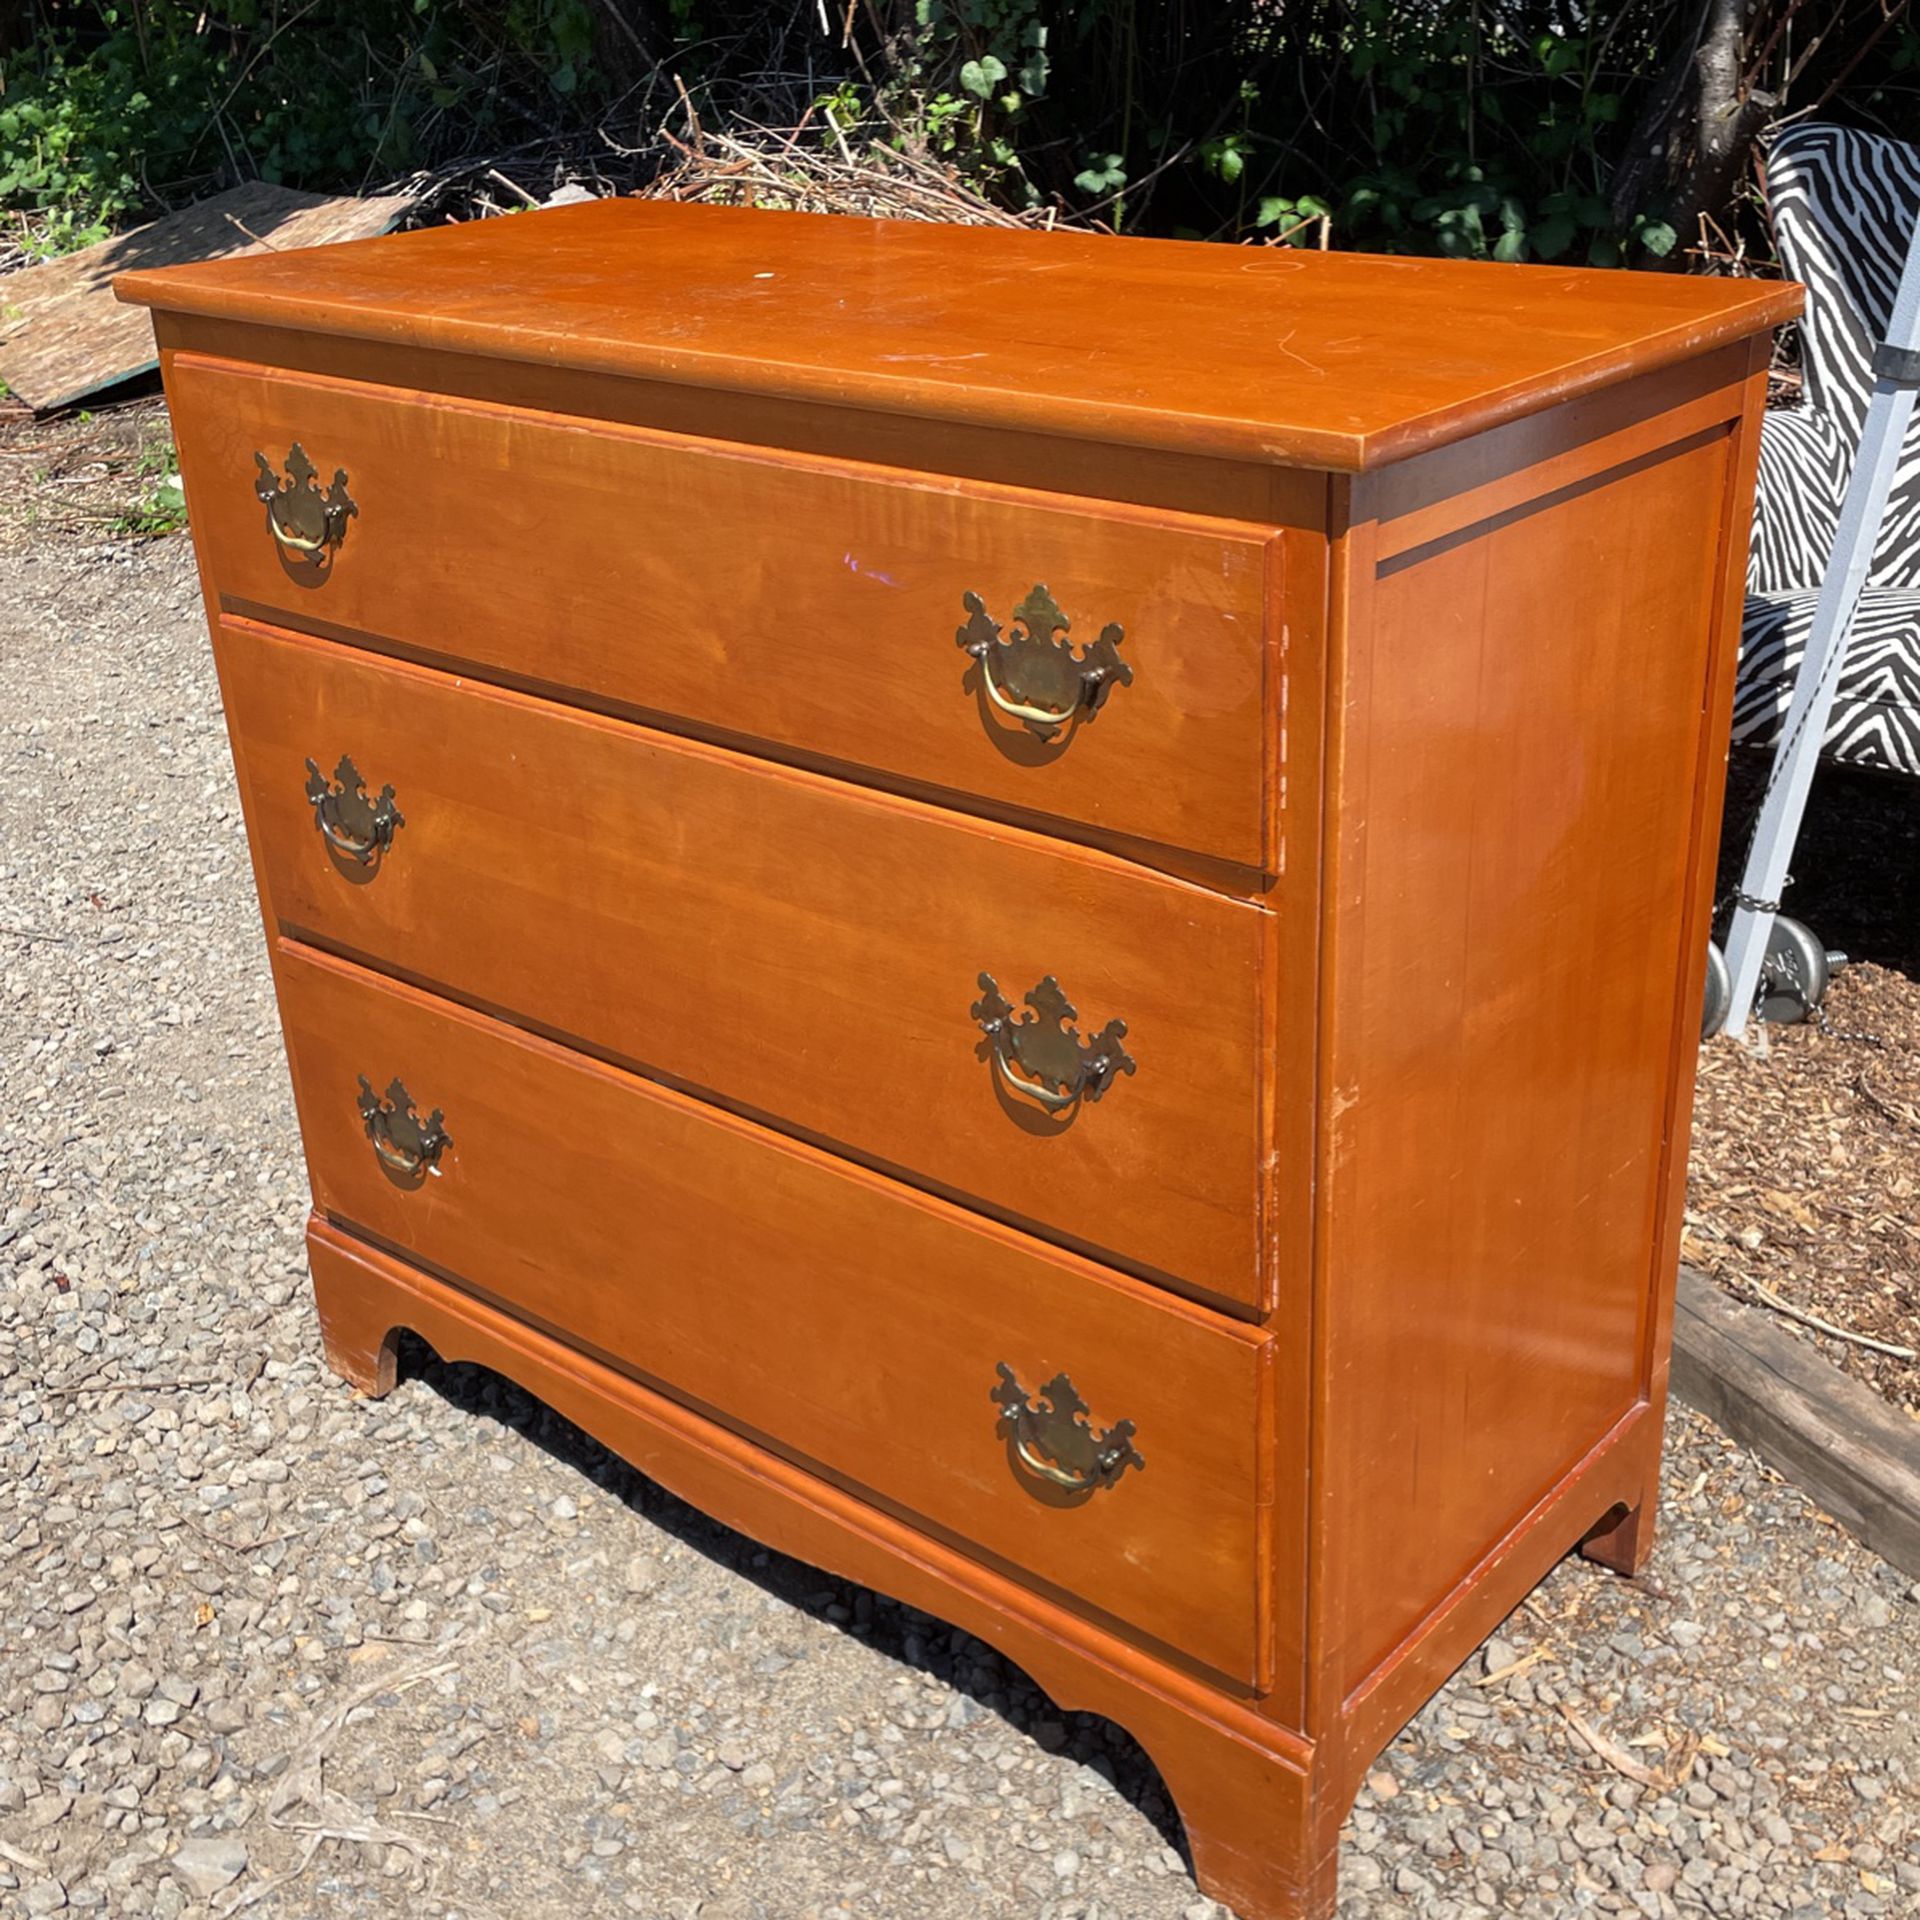 Nice Dovetail Jointed Maple Dresser